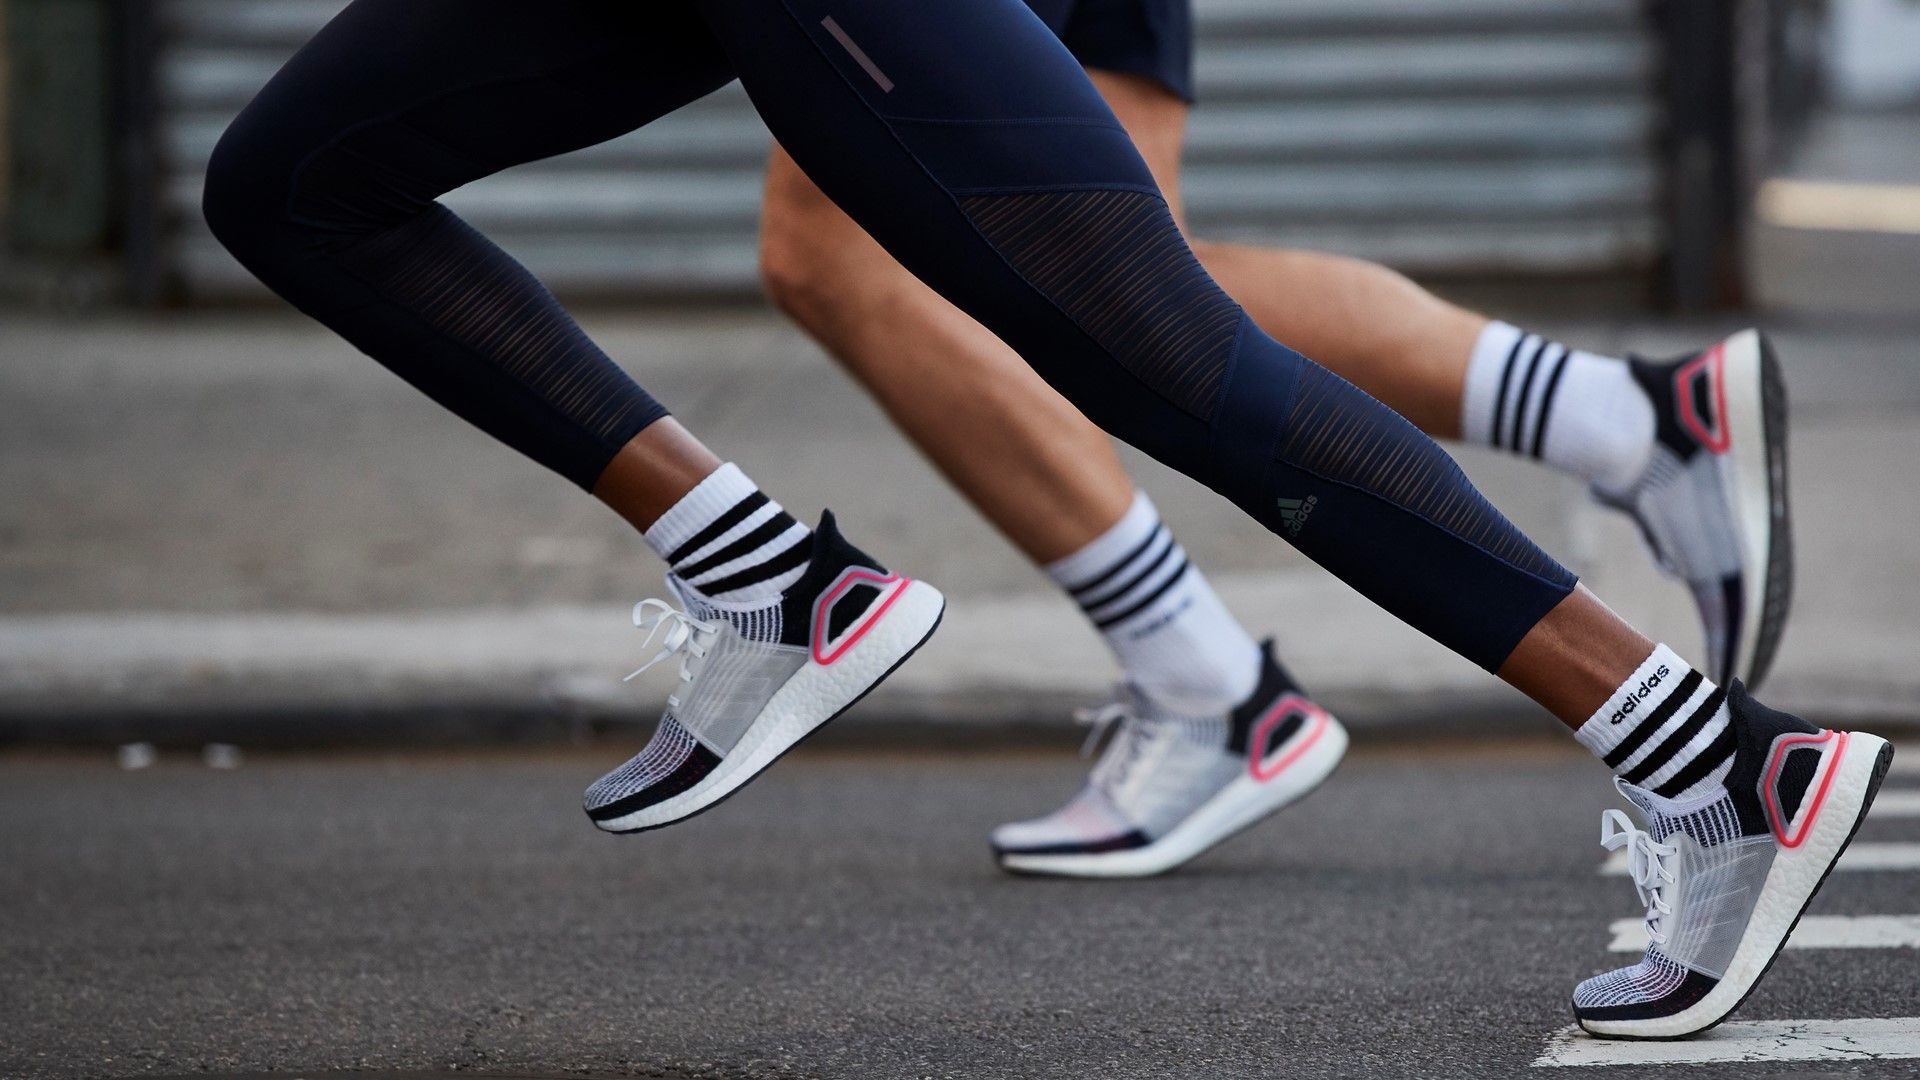 catch a cold Glimpse Distant Ethical running shoes to get your workout off on the right foot